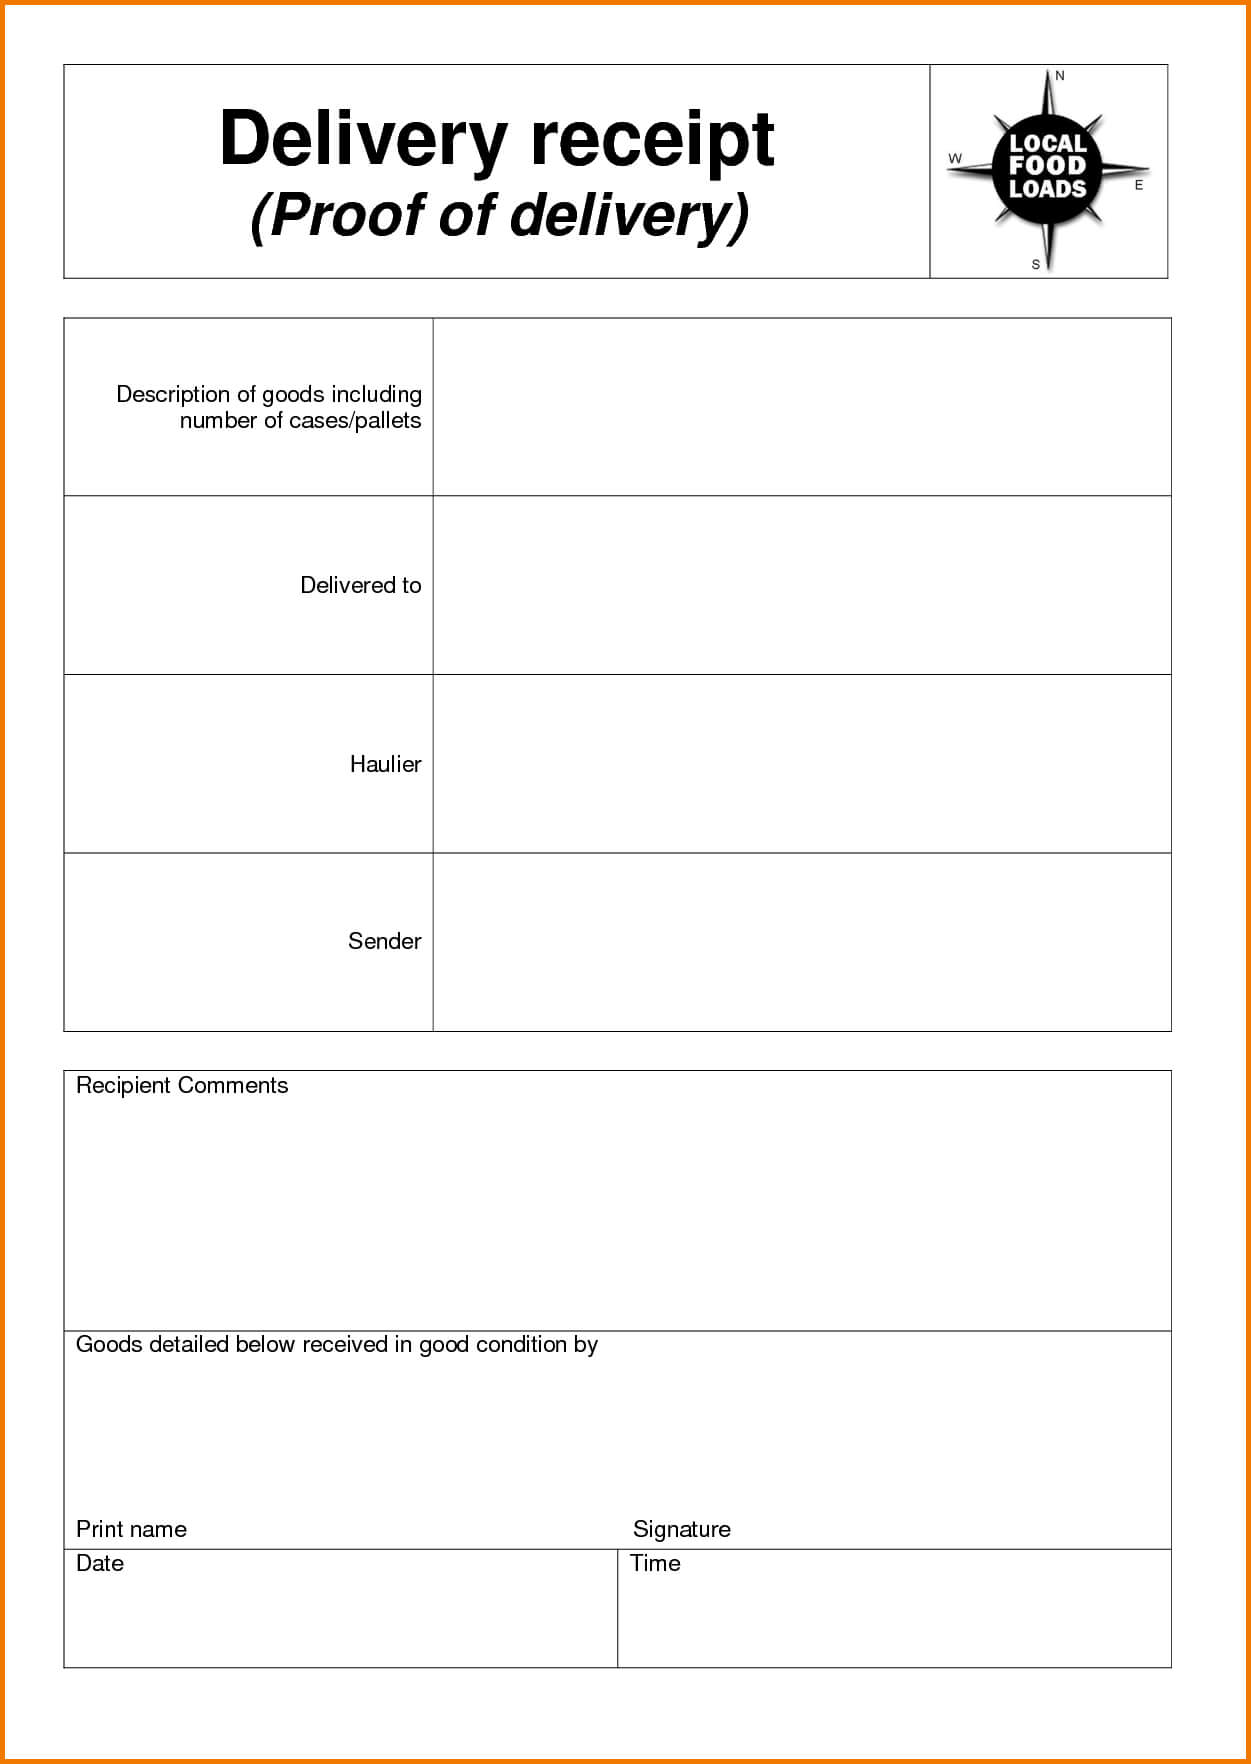 delivery-receipt-template-authorization-letter-pdf-regarding-proof-of